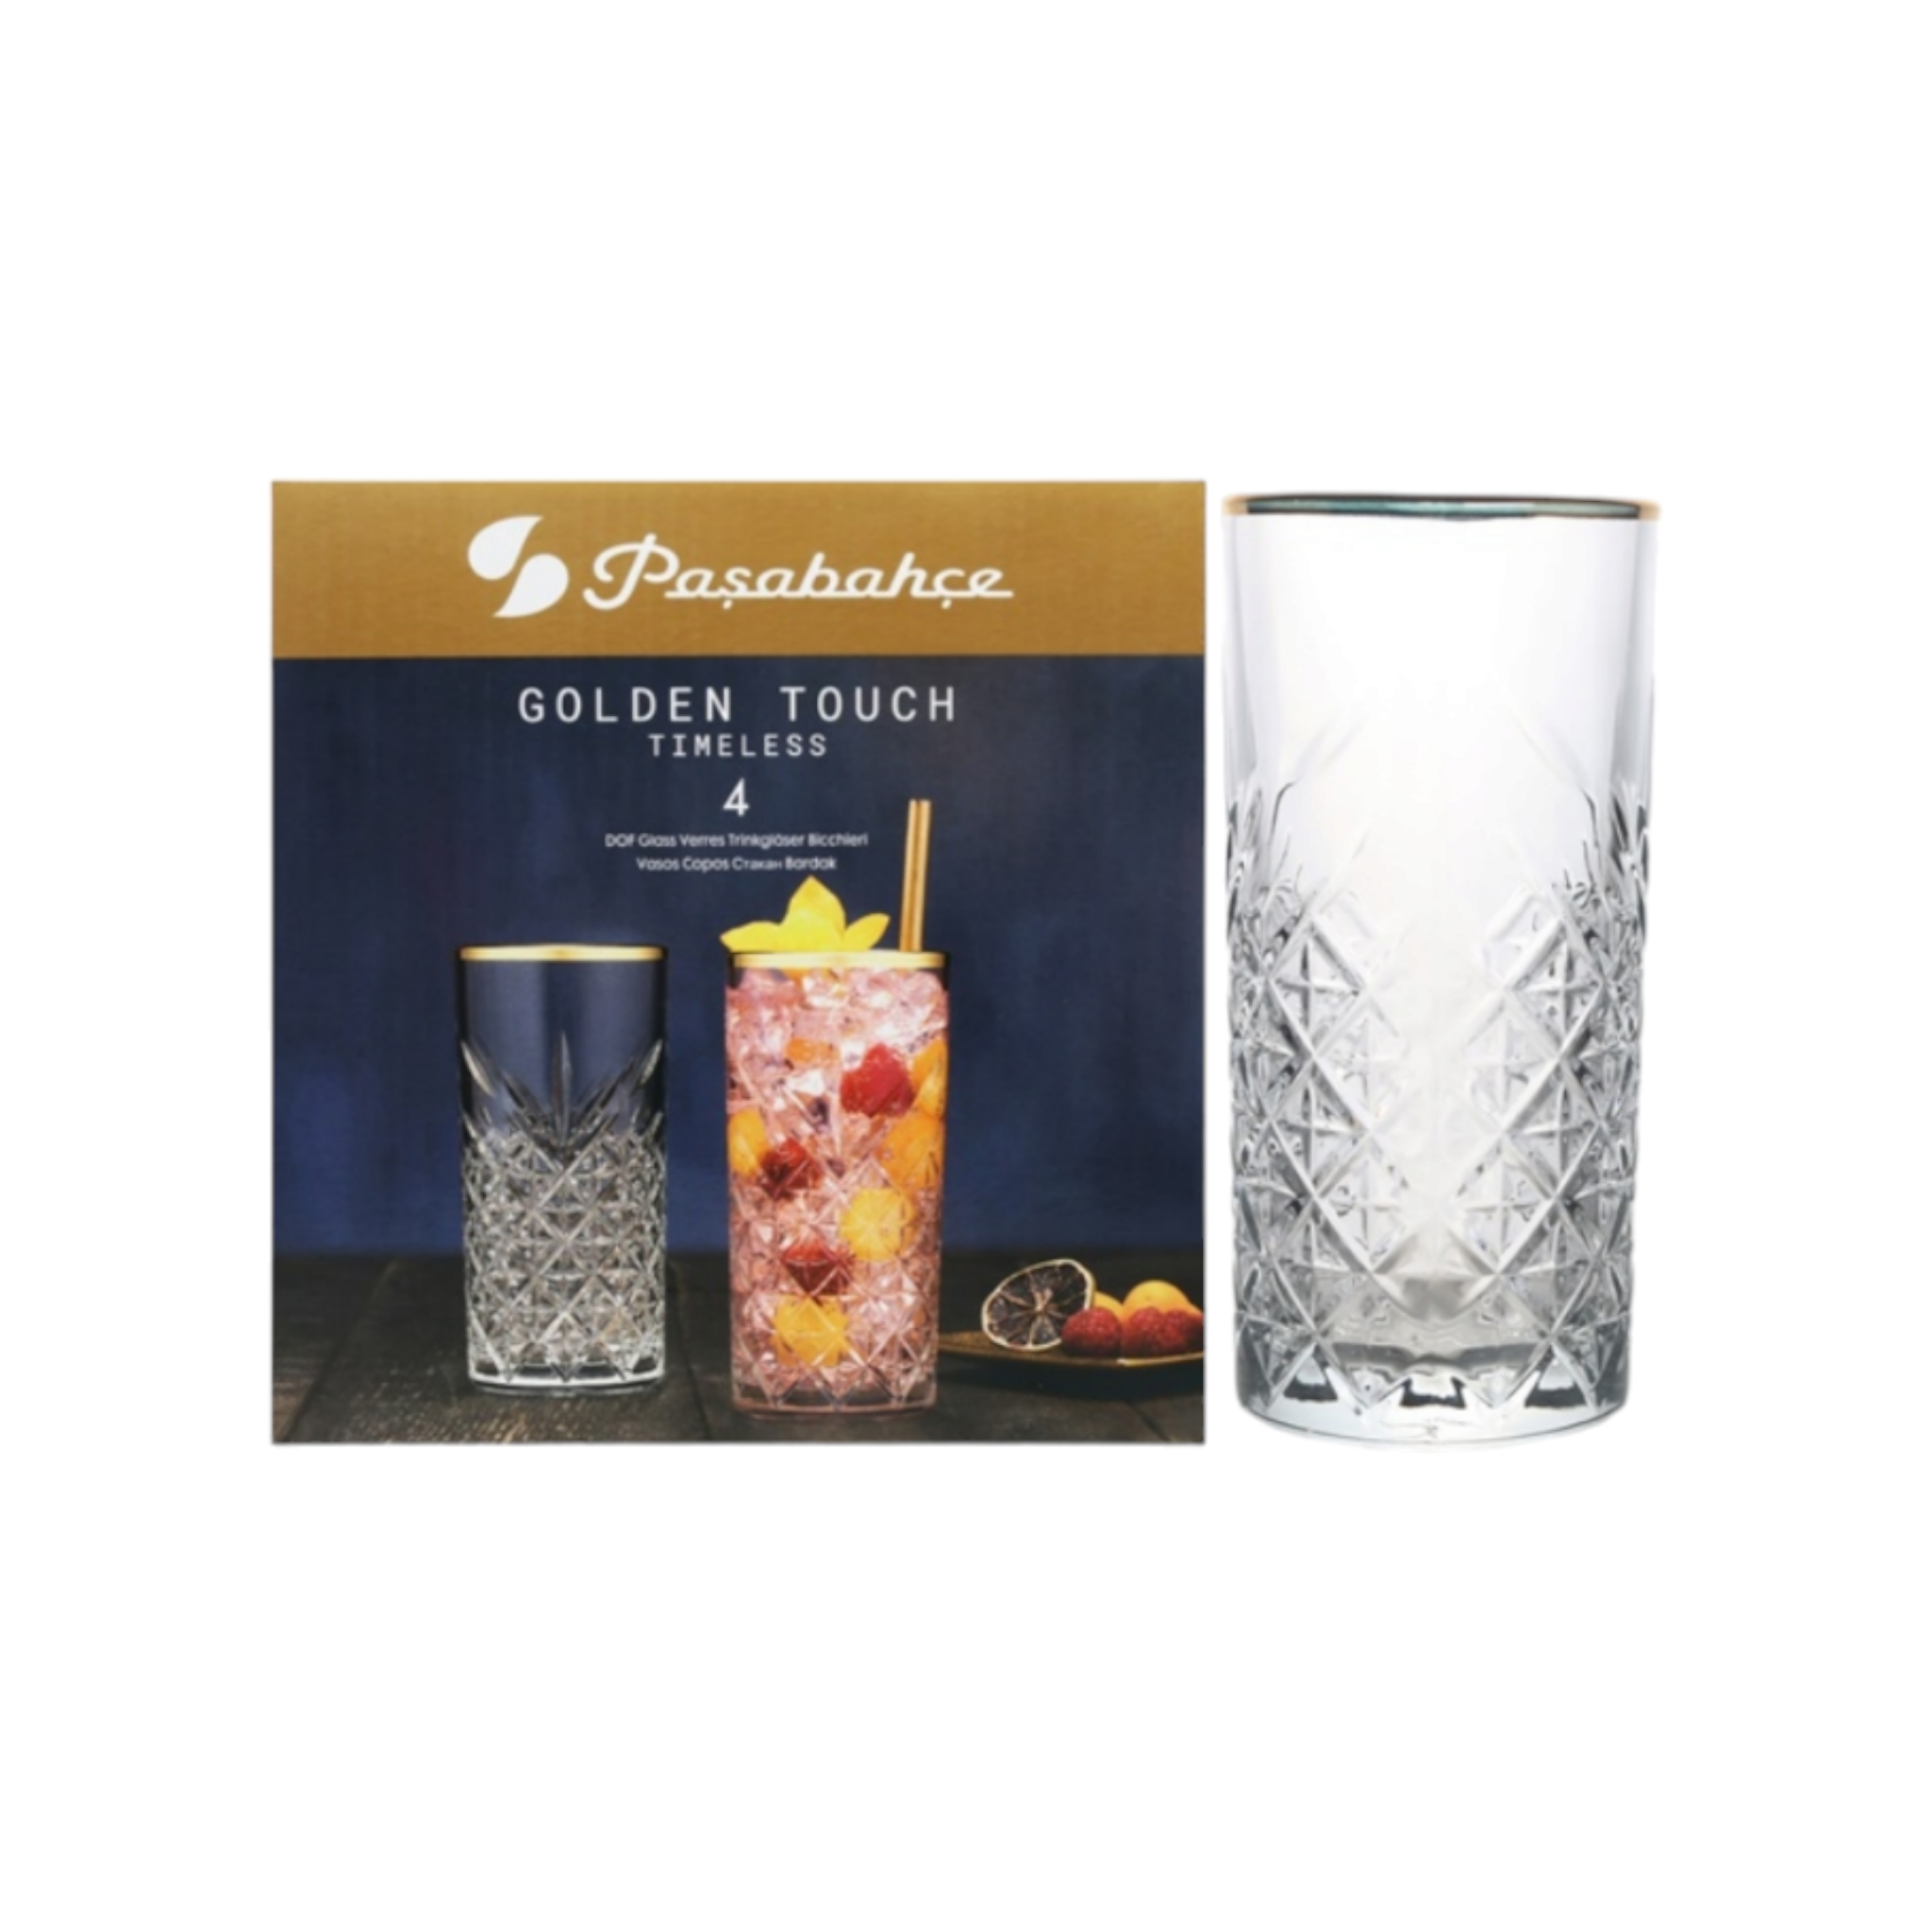 Pasabache Timeless Hiball Glass Tumbler 295ml with Gold Rim 4pack